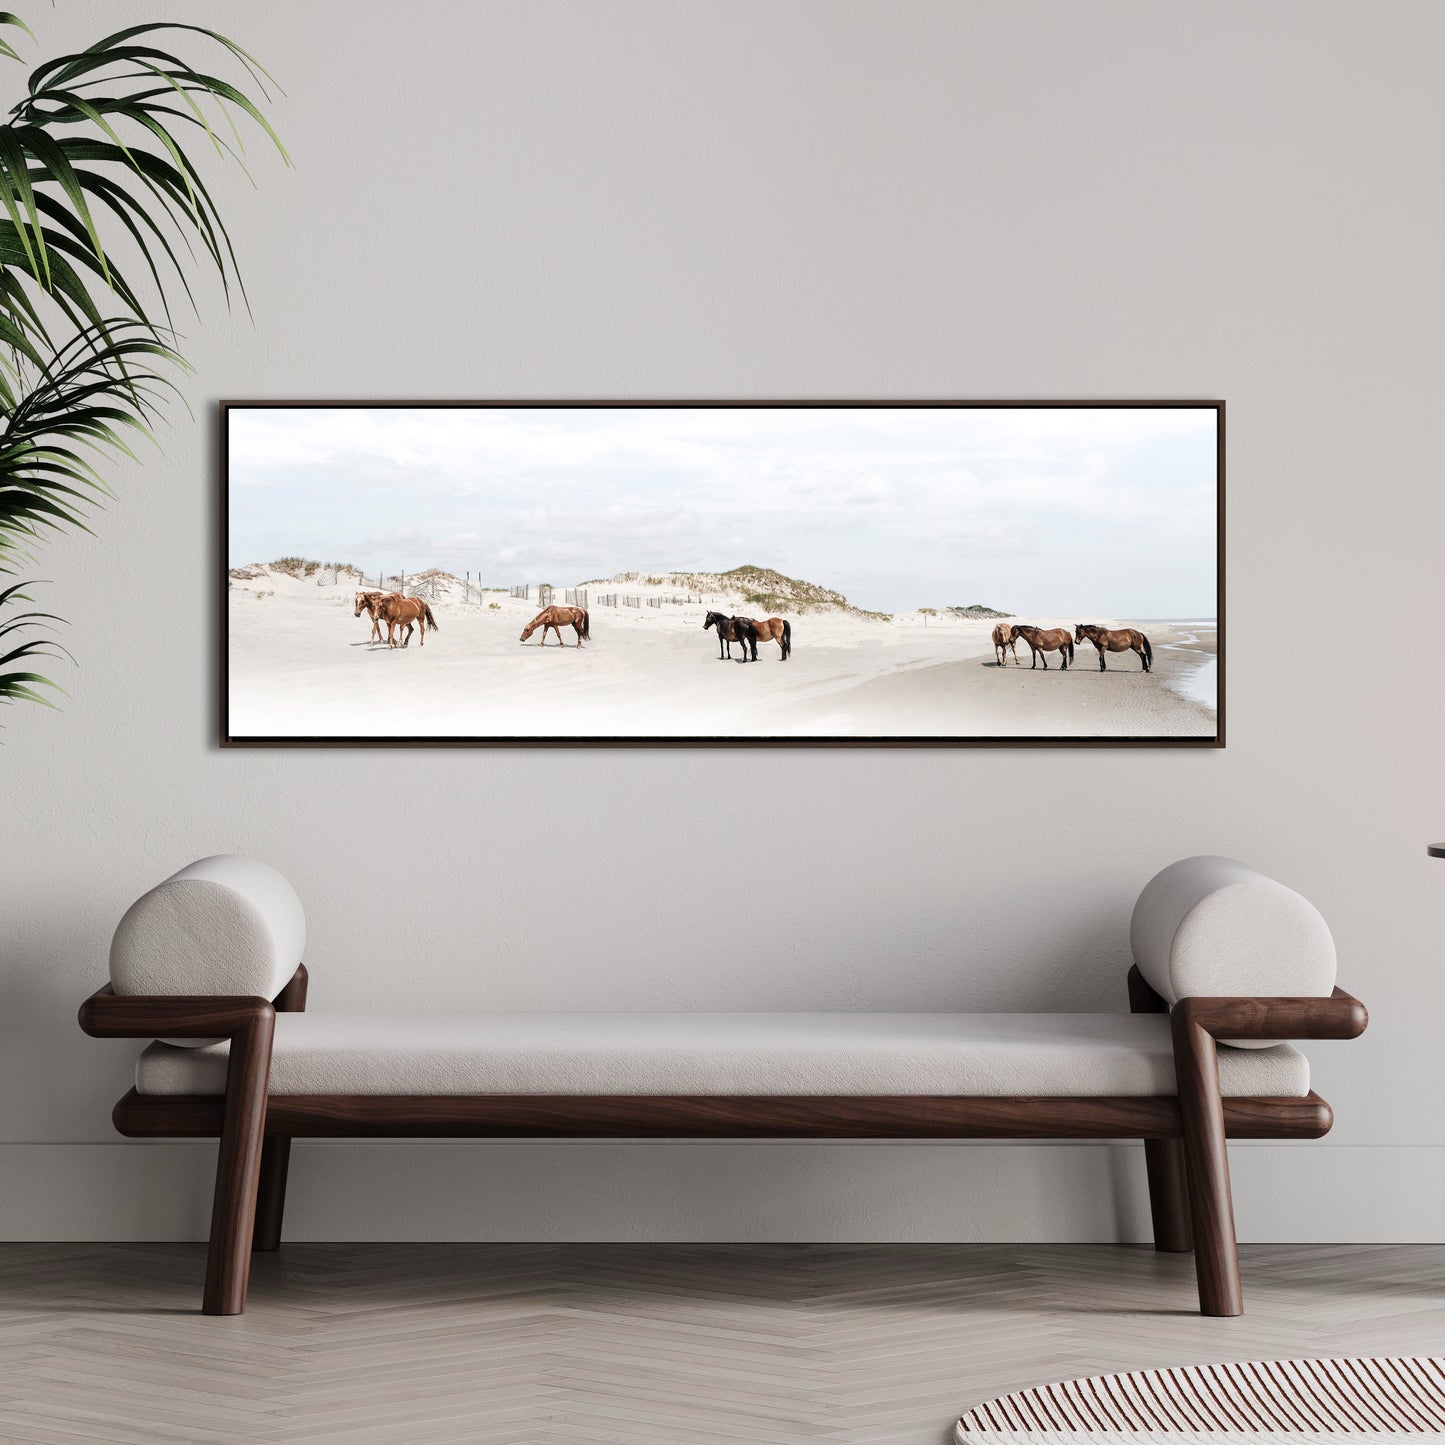 Floating Frame Canvas - Beachside Wild Mustangs of Corolla Beach, Outer Banks